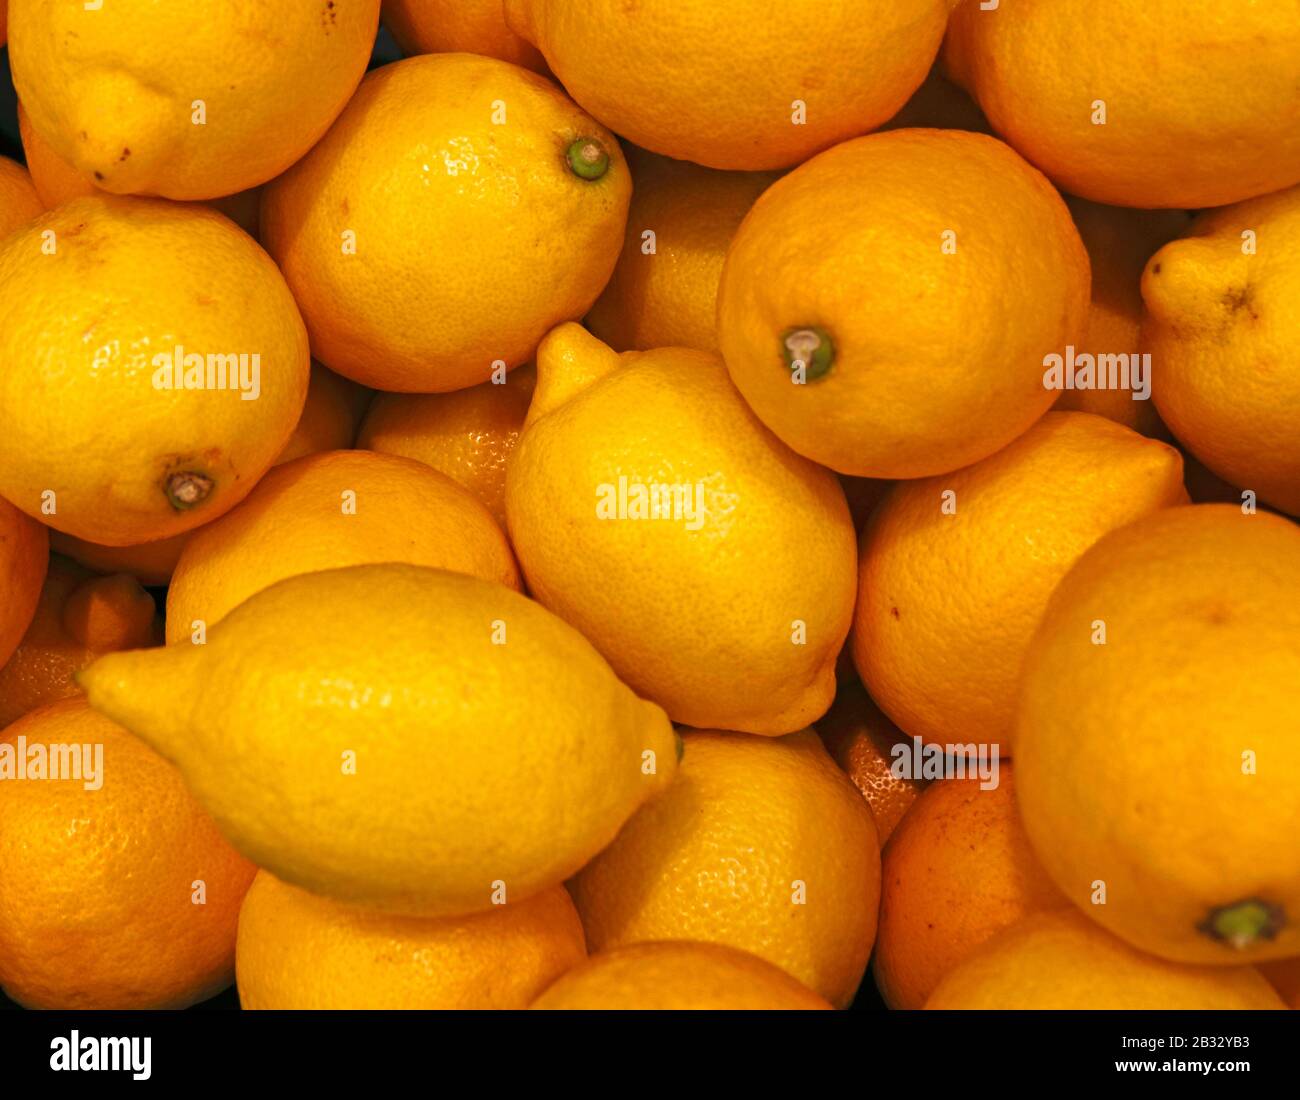 A view of lemons, Citrus x limon, on display in an English supermarket. Stock Photo